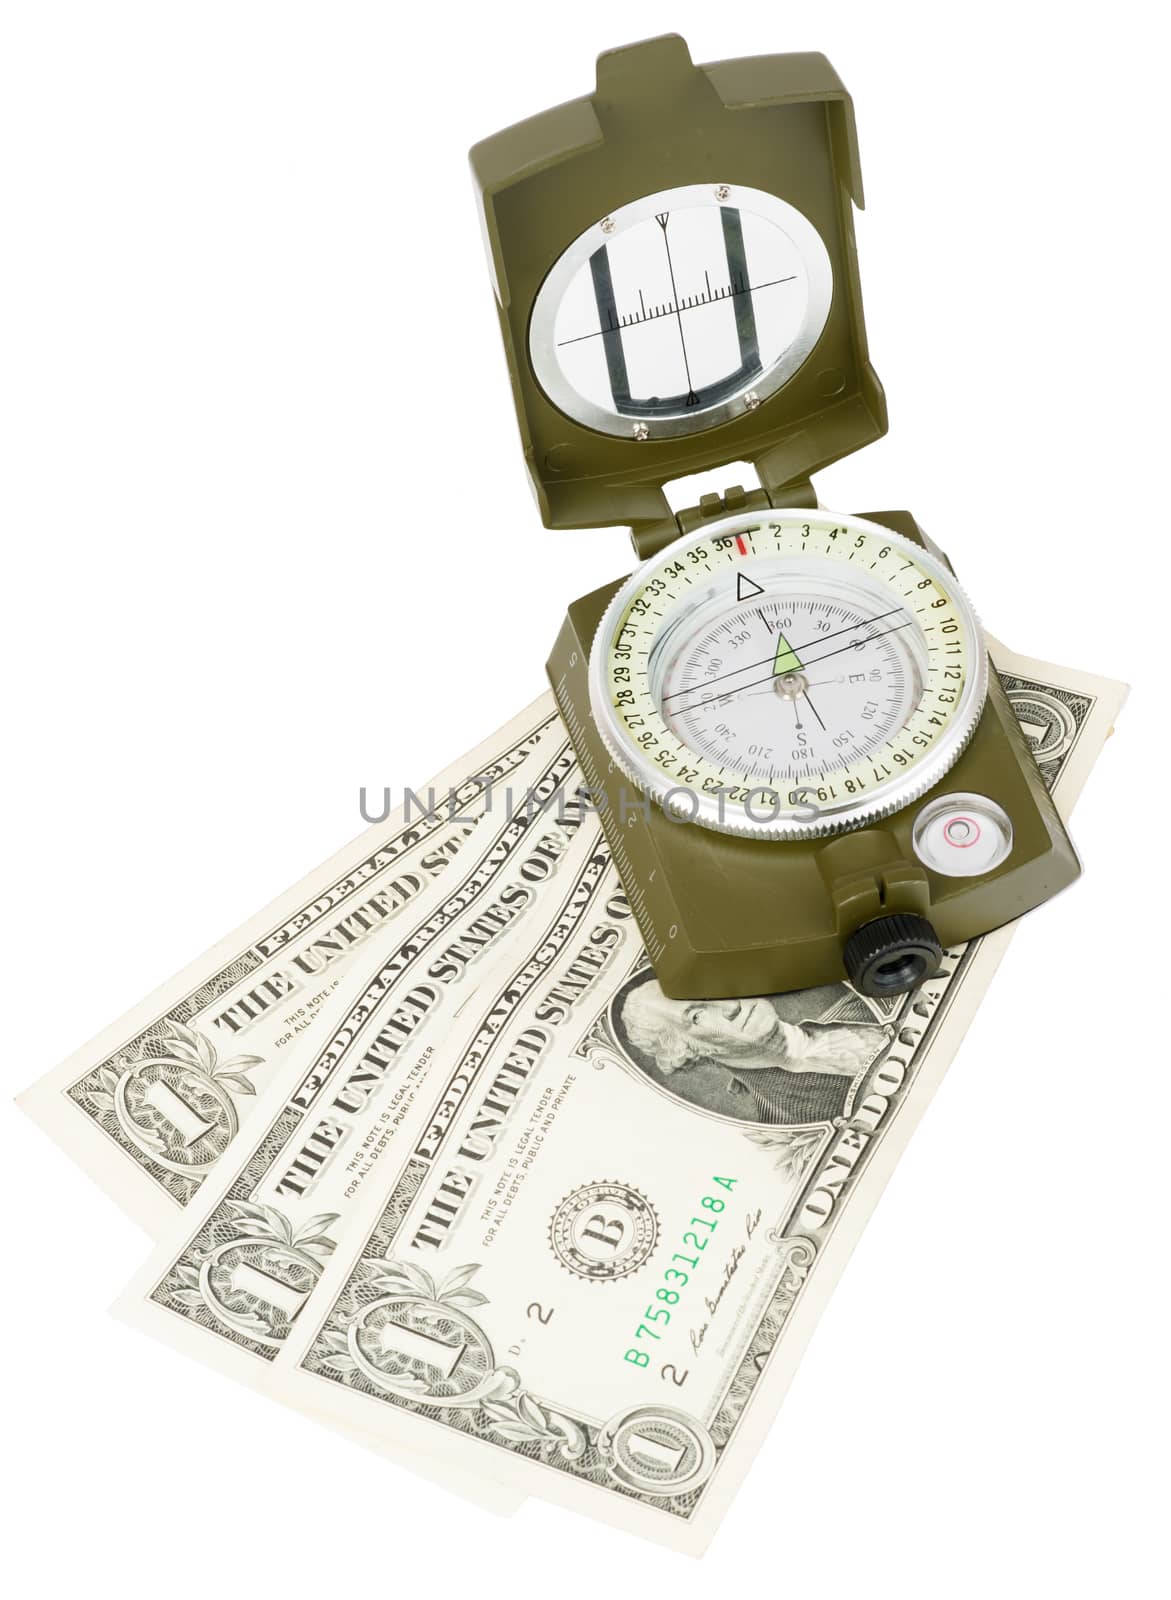 Vintage brass compass with cash on isolated white background, close up view